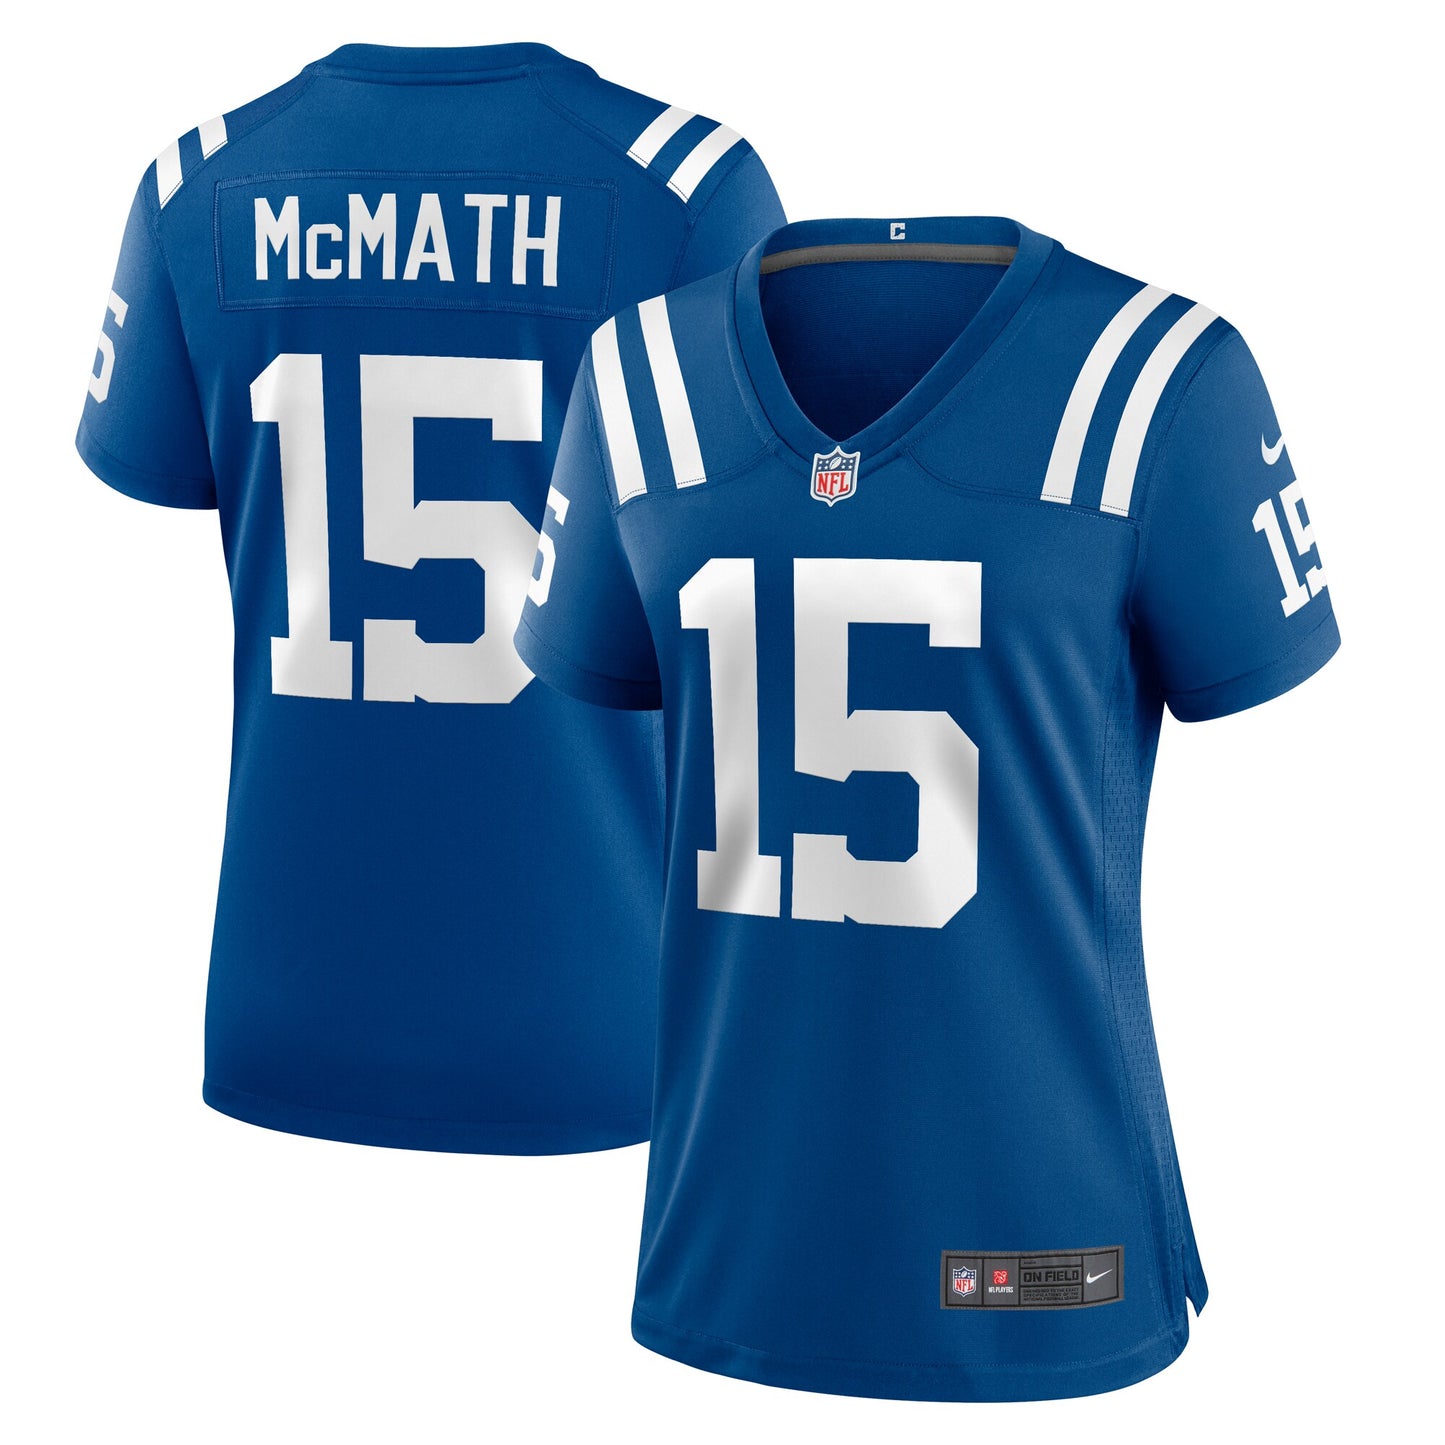 Racey McMath Indianapolis Colts Nike Women's Team Game Jersey - Royal